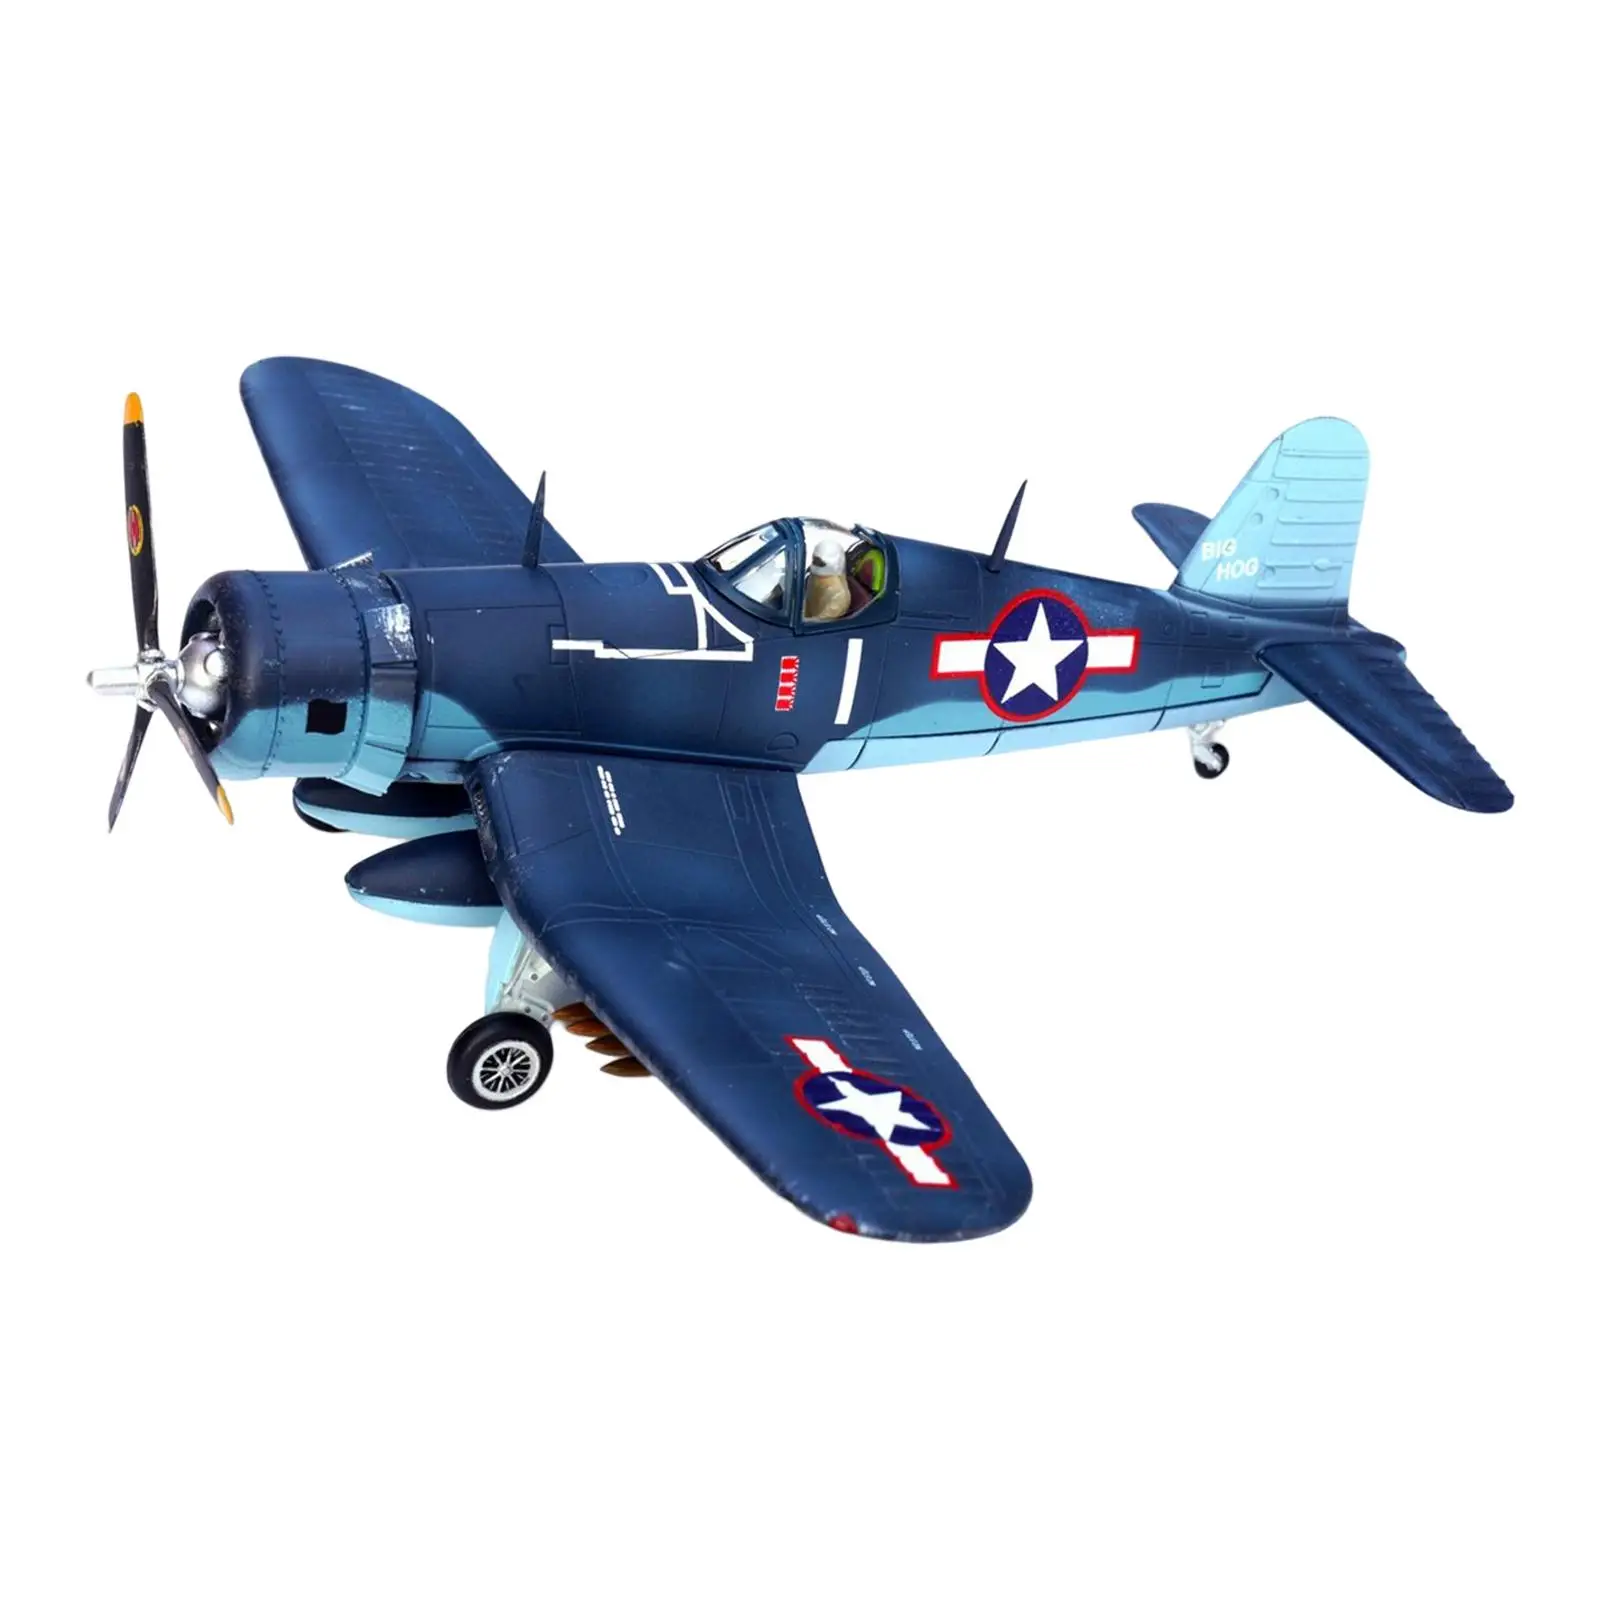 

1/72 Plane Model Miniature Model Playset Table Centerpiece 1/72 Fighter Model for Children Boys Kids Adults Holiday Gift